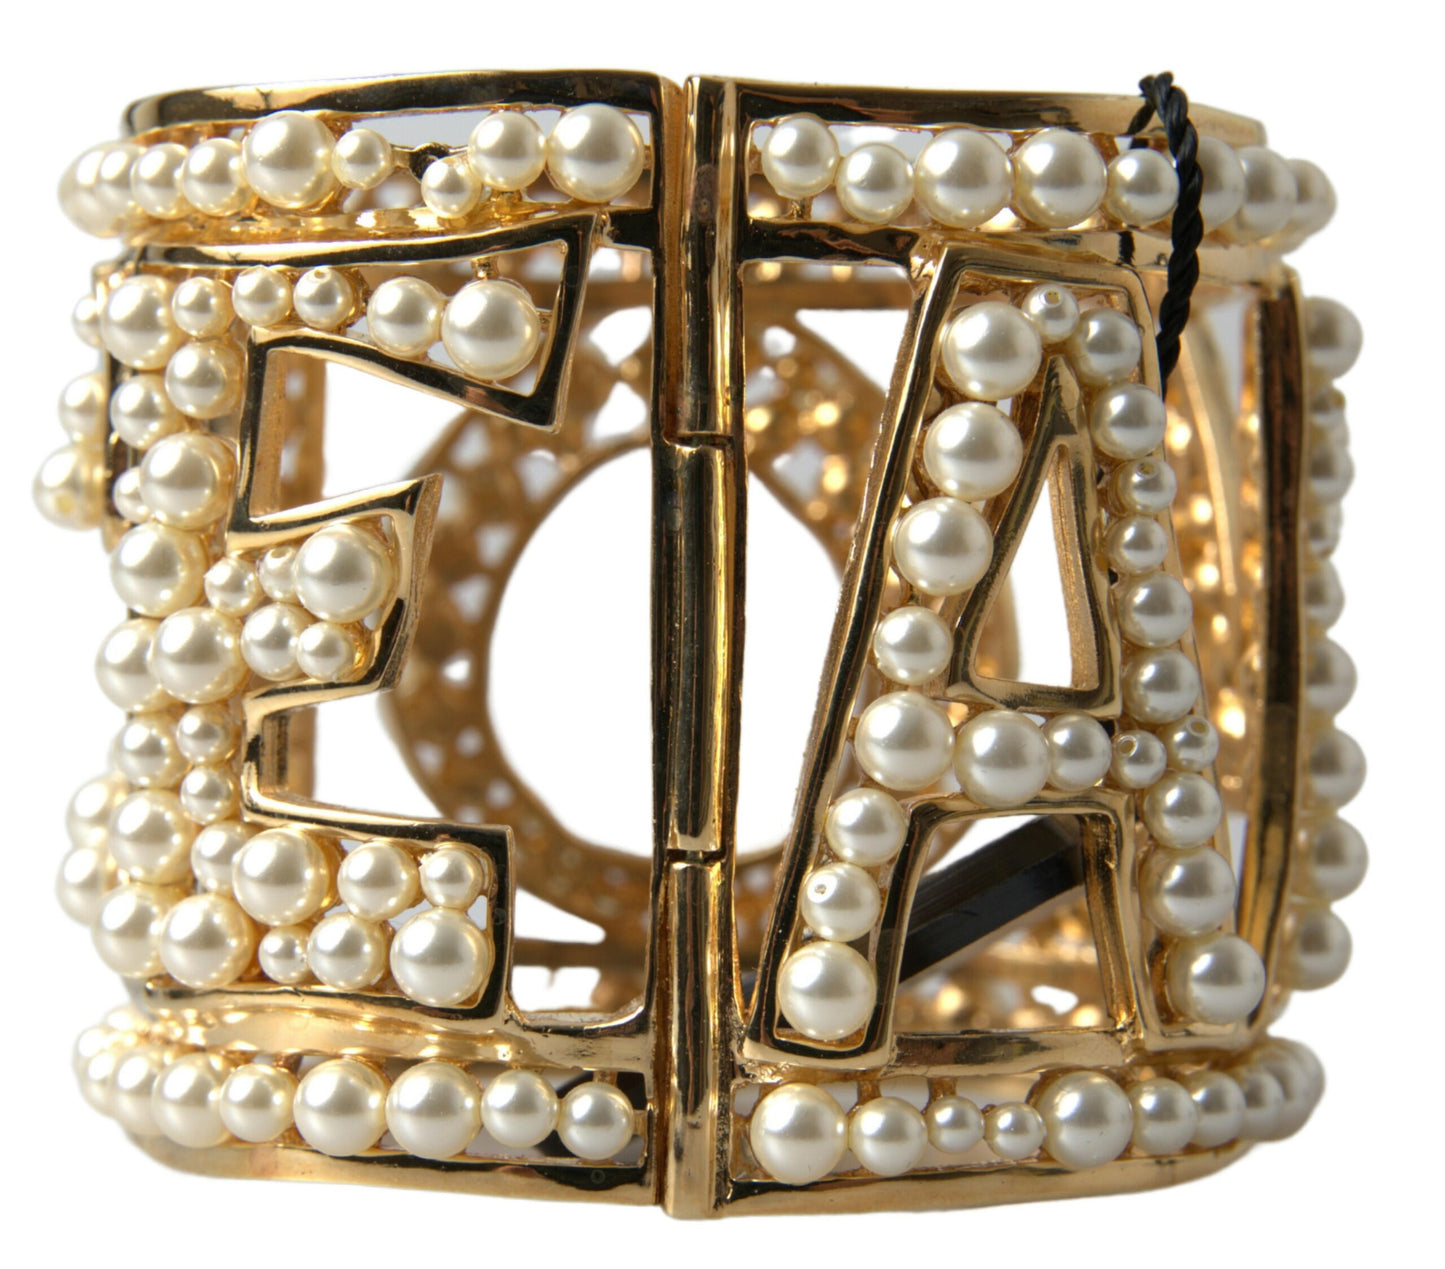 Dolce & Gabbana Elegant Gold Cuff with AMORE & Faux Pearls